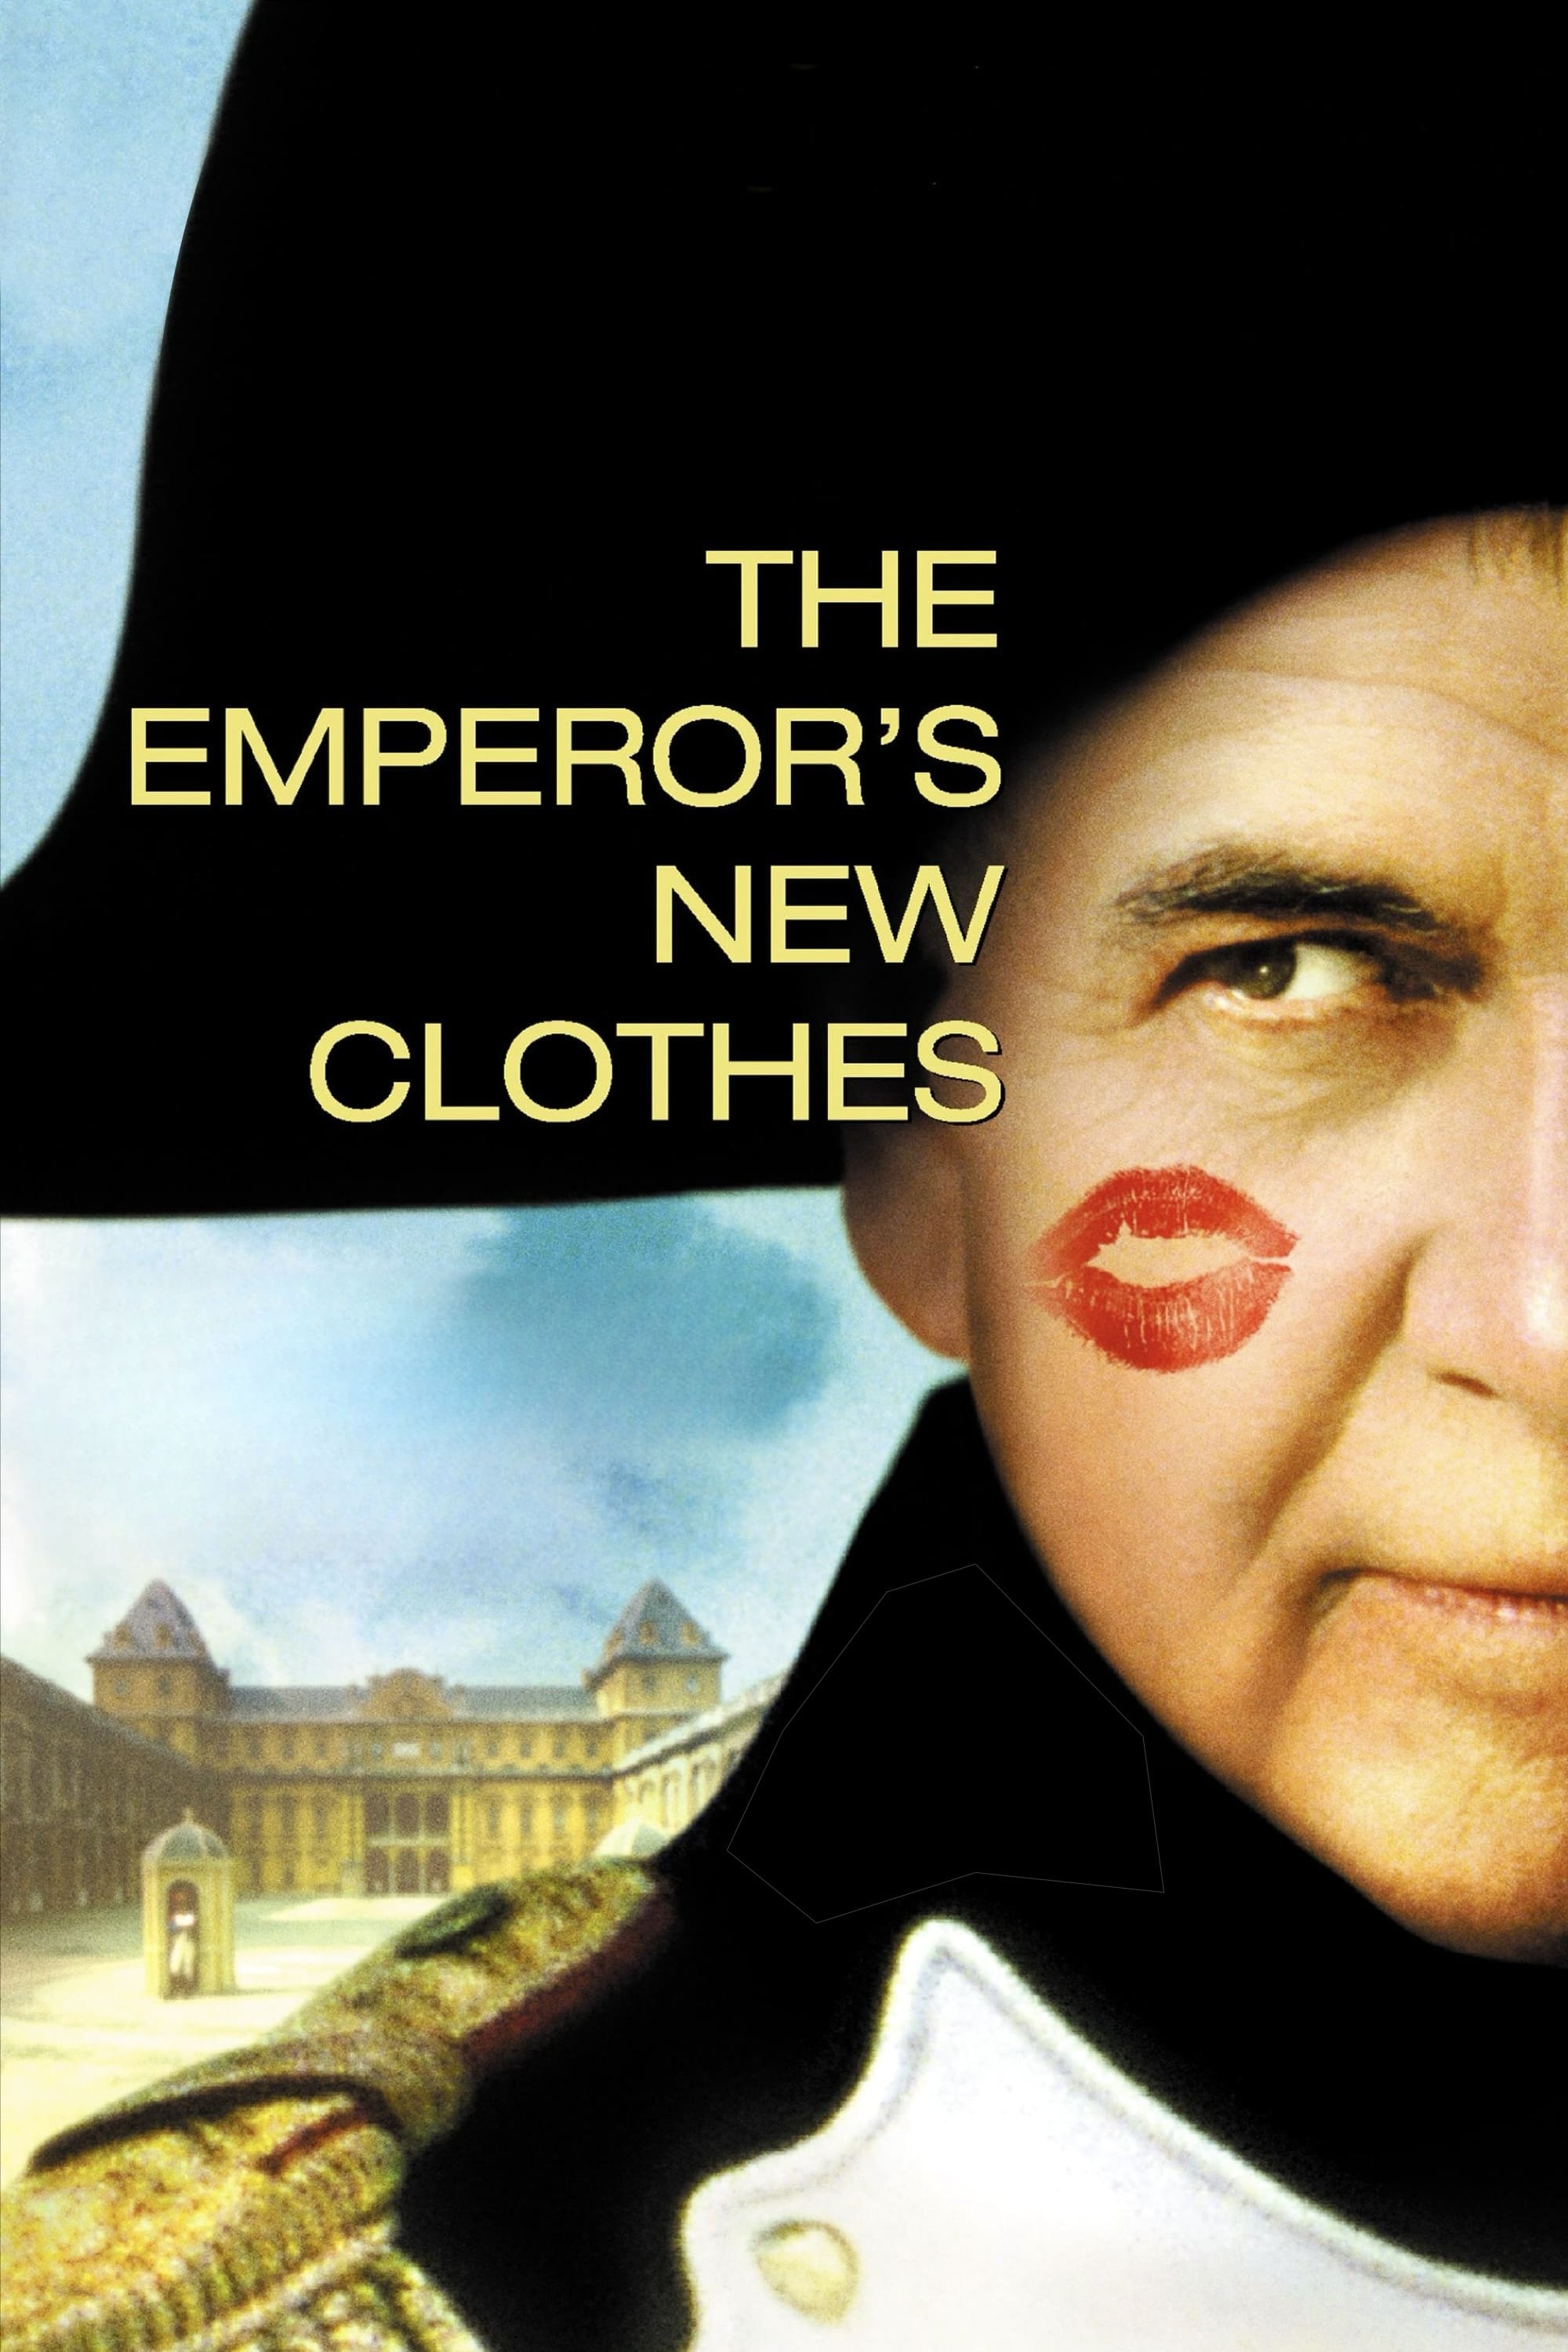 The Emperor's New Clothes (2001) 224Kbps 25Fps VCD Turkish Audio TAC